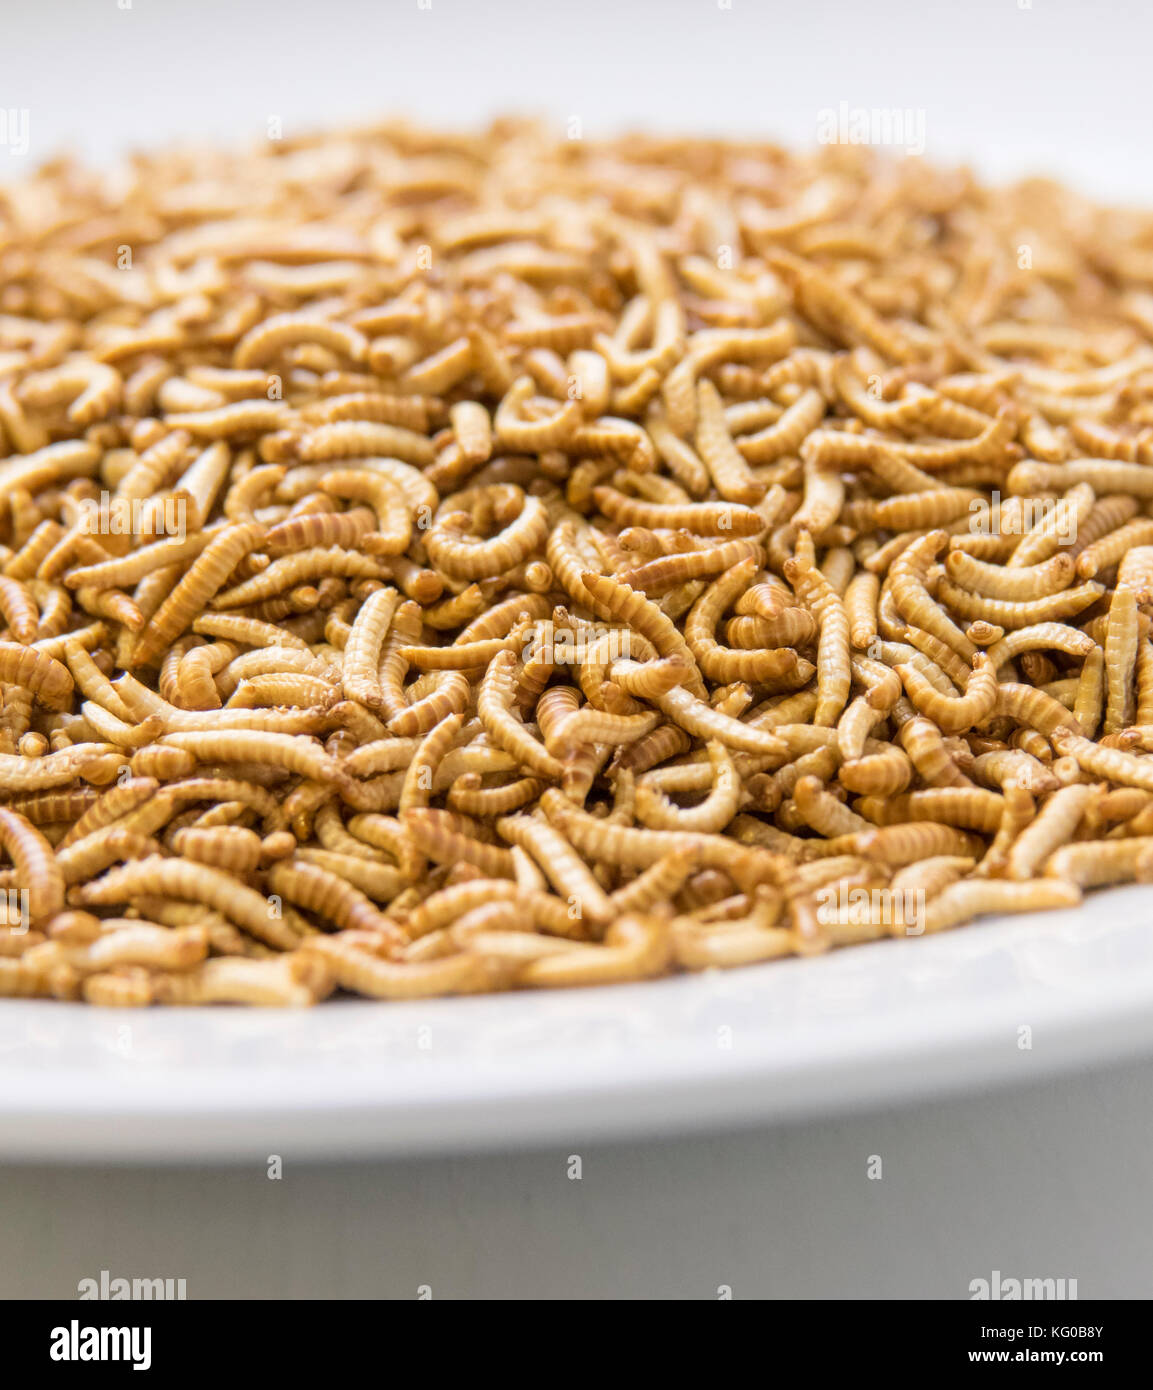 Buffalo Worms on plate in kitchen. Edible insects as food product filled with protein and nutrition. Stock Photo